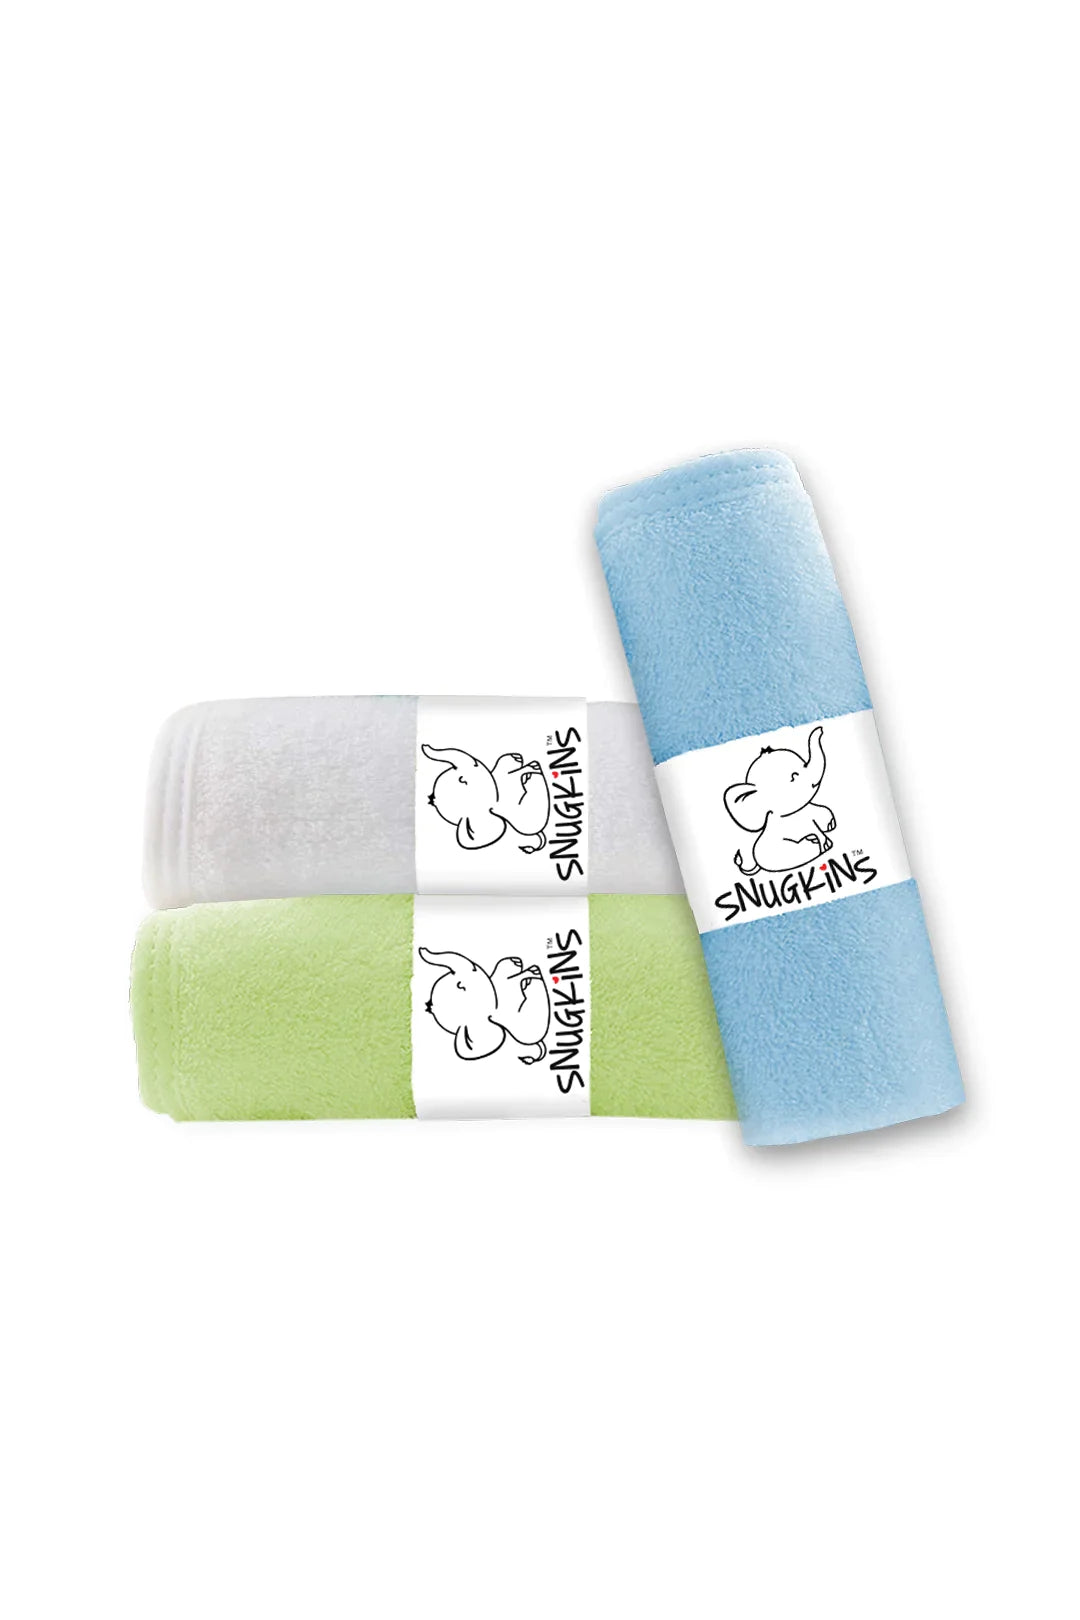 Newborn Bath Face & Body Towel / Natural Baby Wipes for Soft Skin - Baby Shower Gift Pack of 3